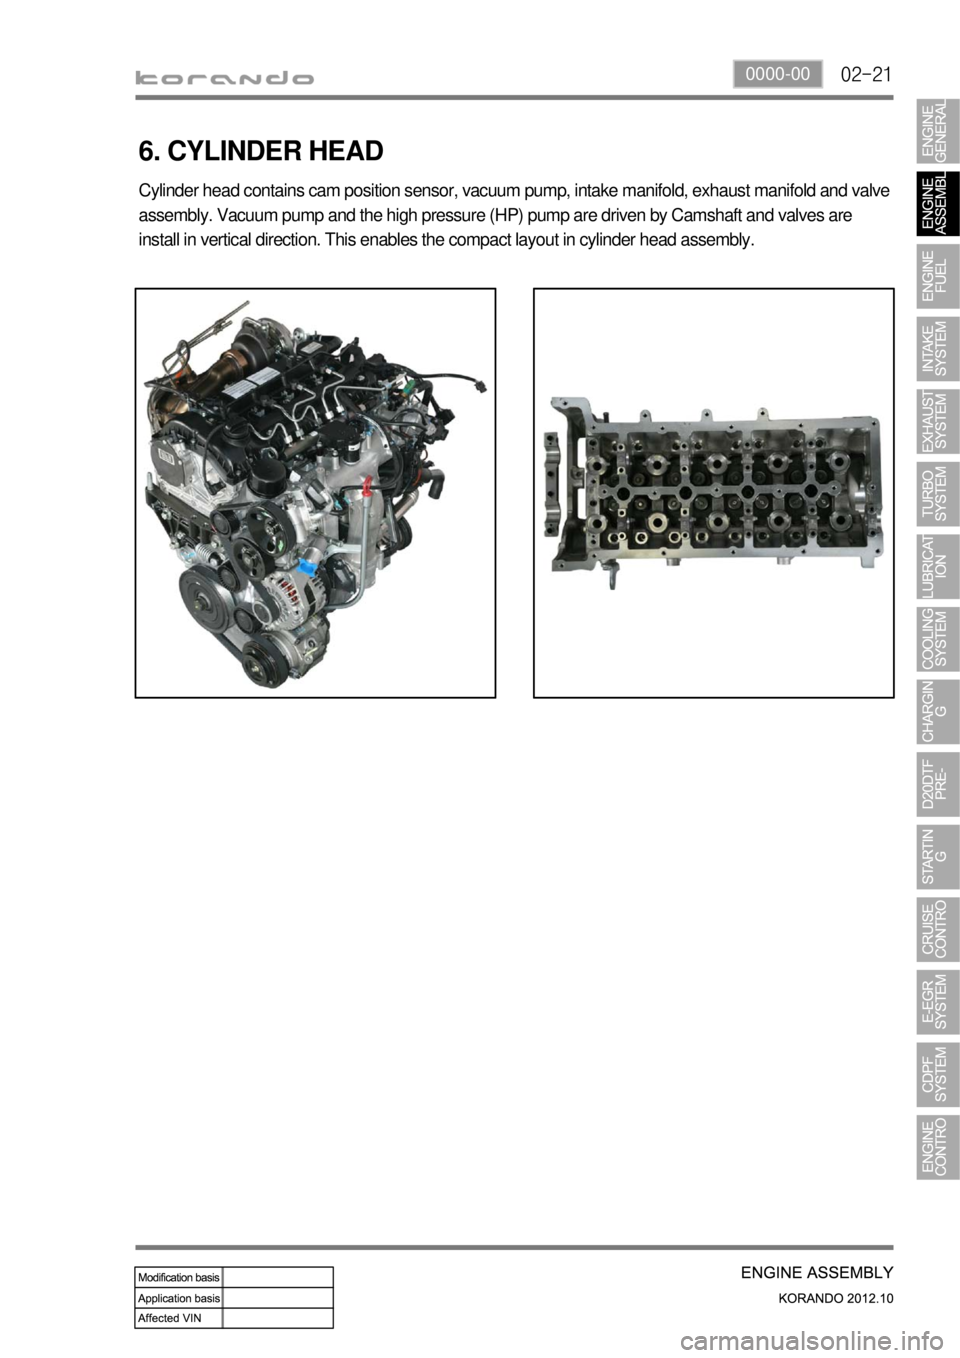 SSANGYONG KORANDO 2012  Service Manual 02-210000-00
6. CYLINDER HEAD
Cylinder head contains cam position sensor, vacuum pump, intake manifold, exhaust manifold and valve 
assembly. Vacuum pump and the high pressure (HP) pump are driven by 